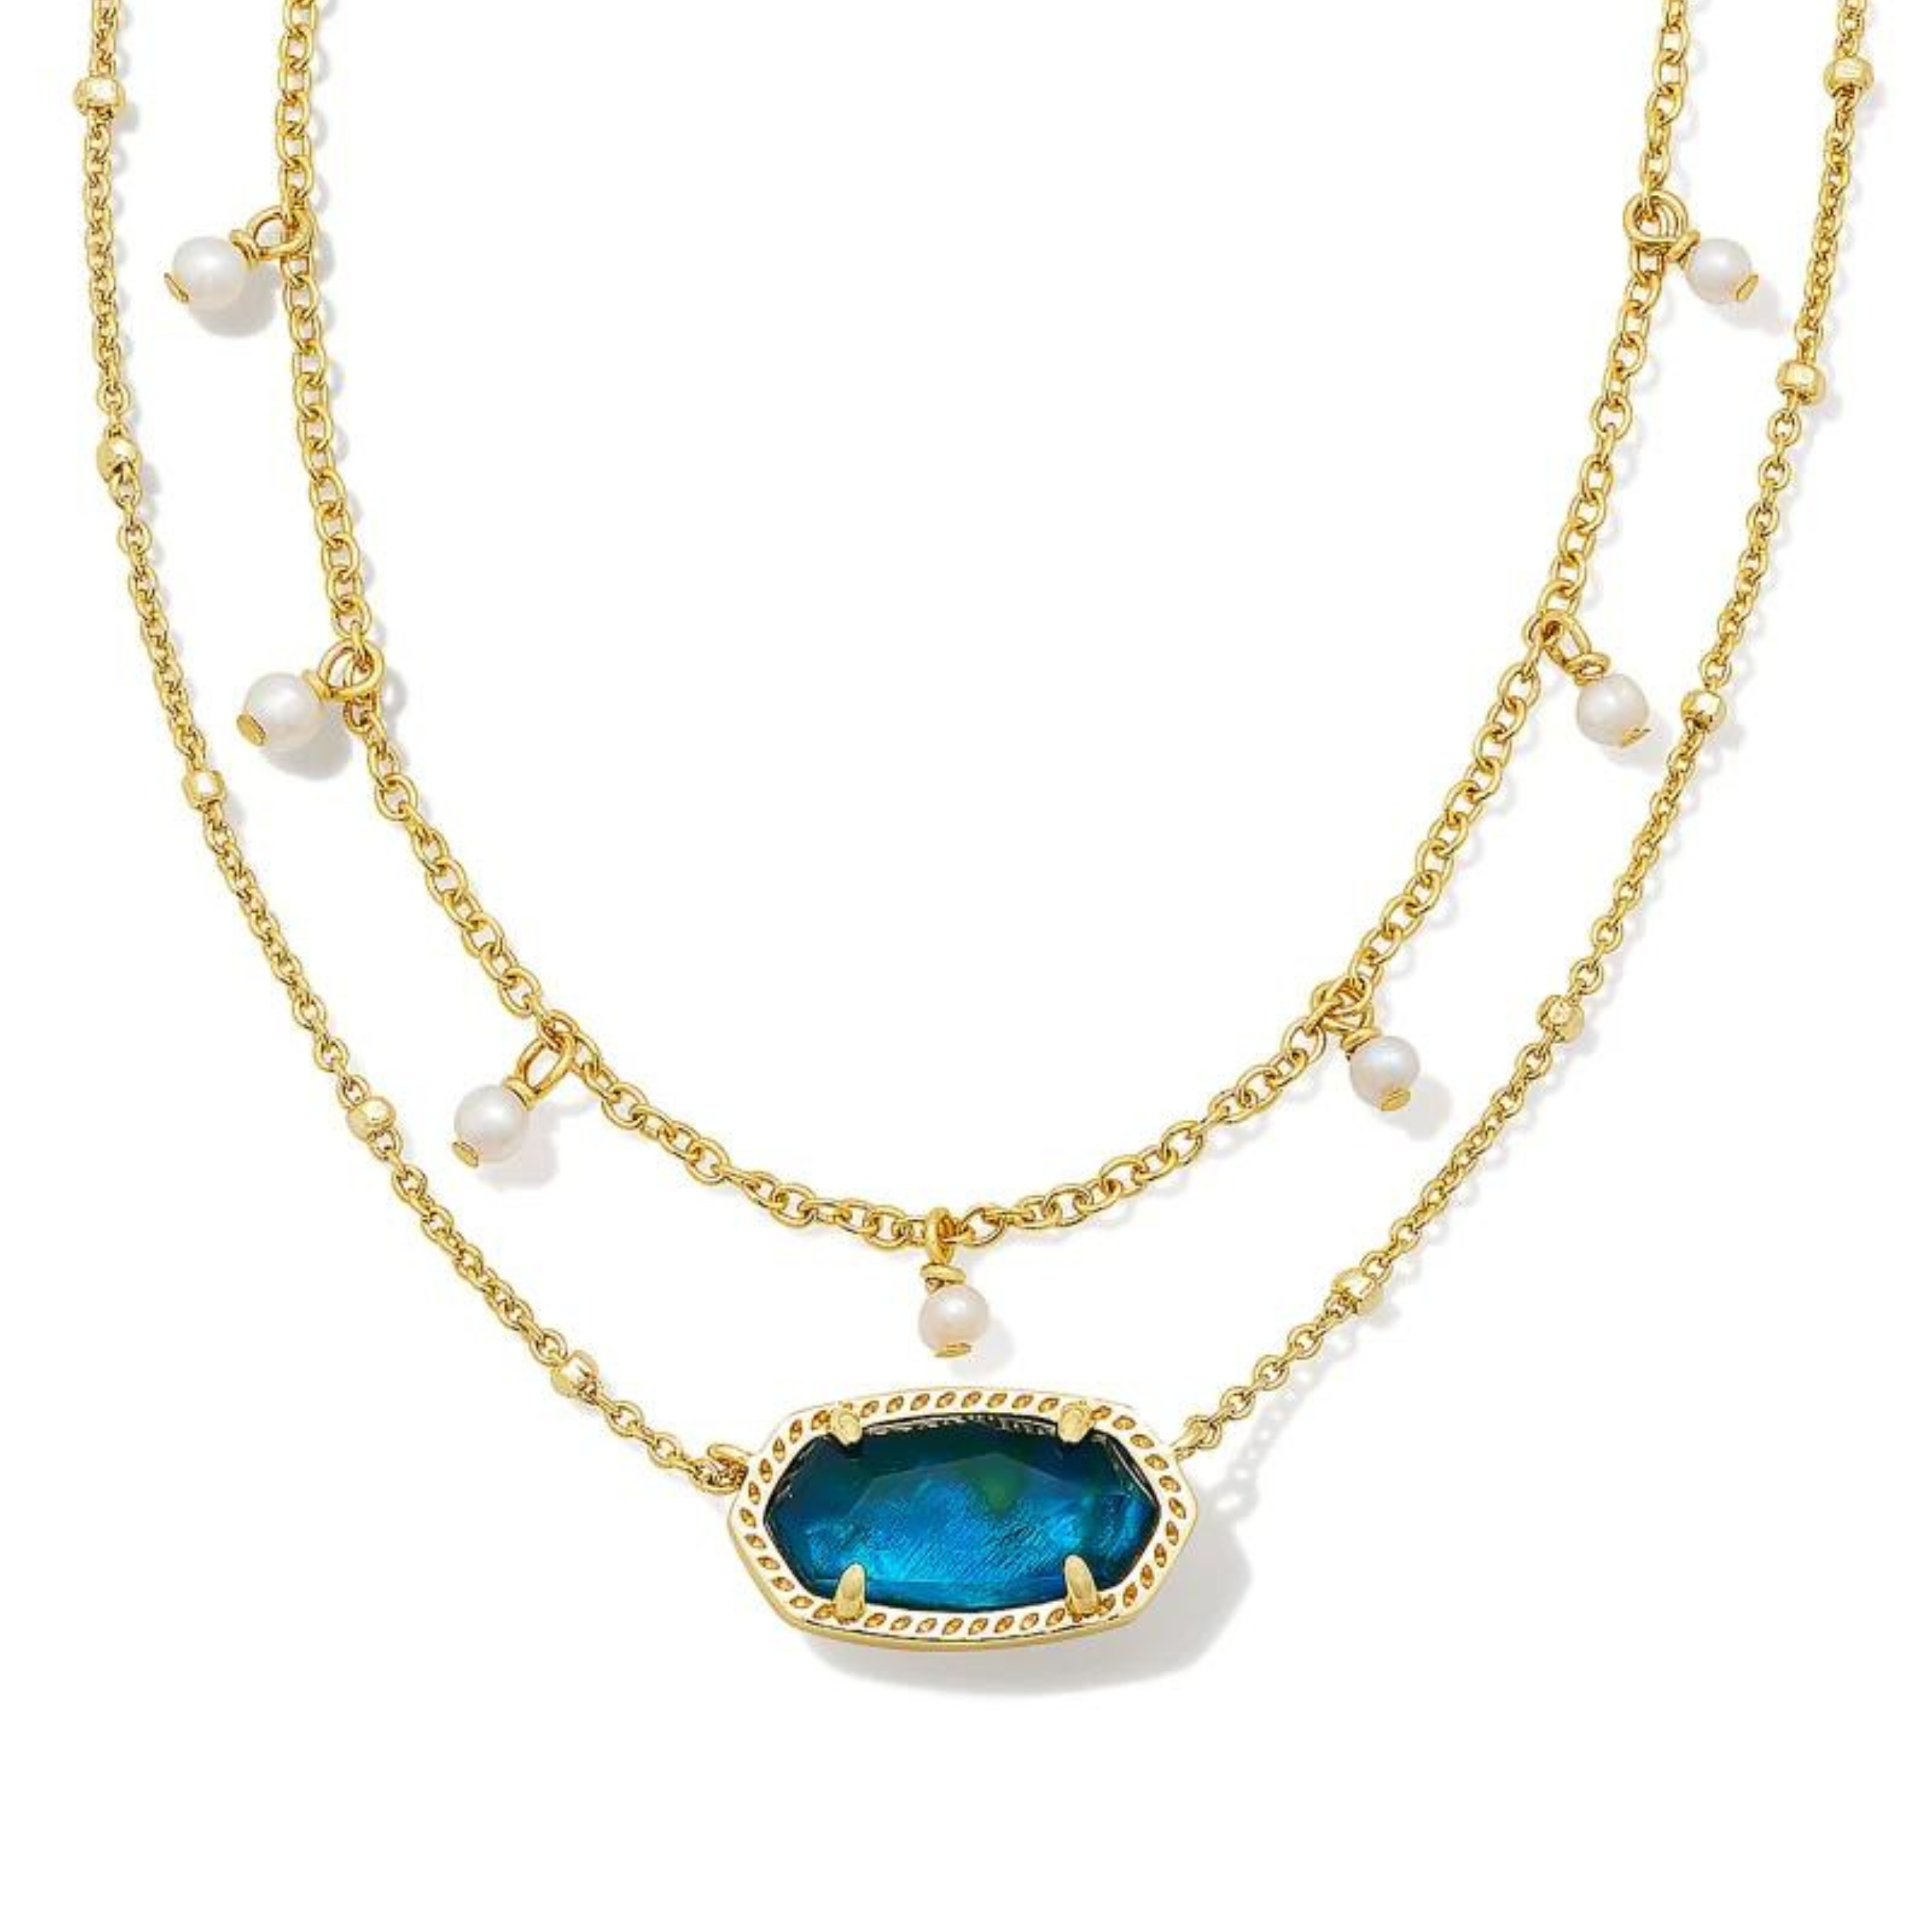 Copy of Kendra Scott | Elisa Gold Pearl Multi Strand Necklace in Teal Abalone. Pictured on a white background.